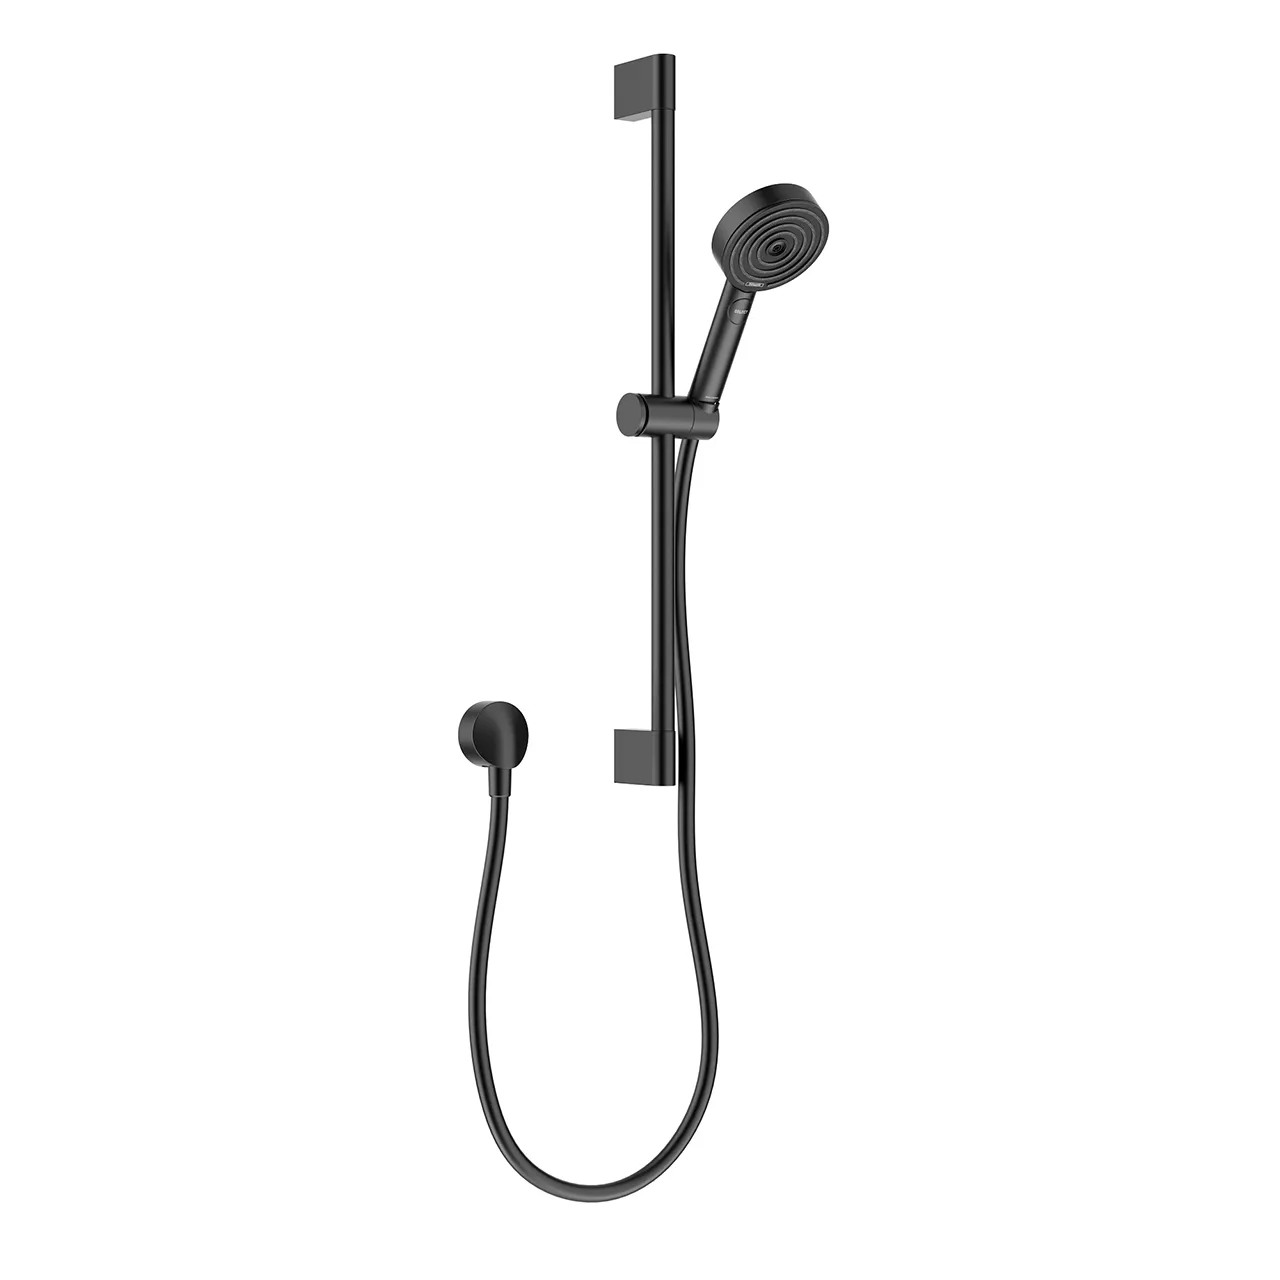 Bathroom – pulsify-select-s-shower-with-shower-bar-by-hansgrohe